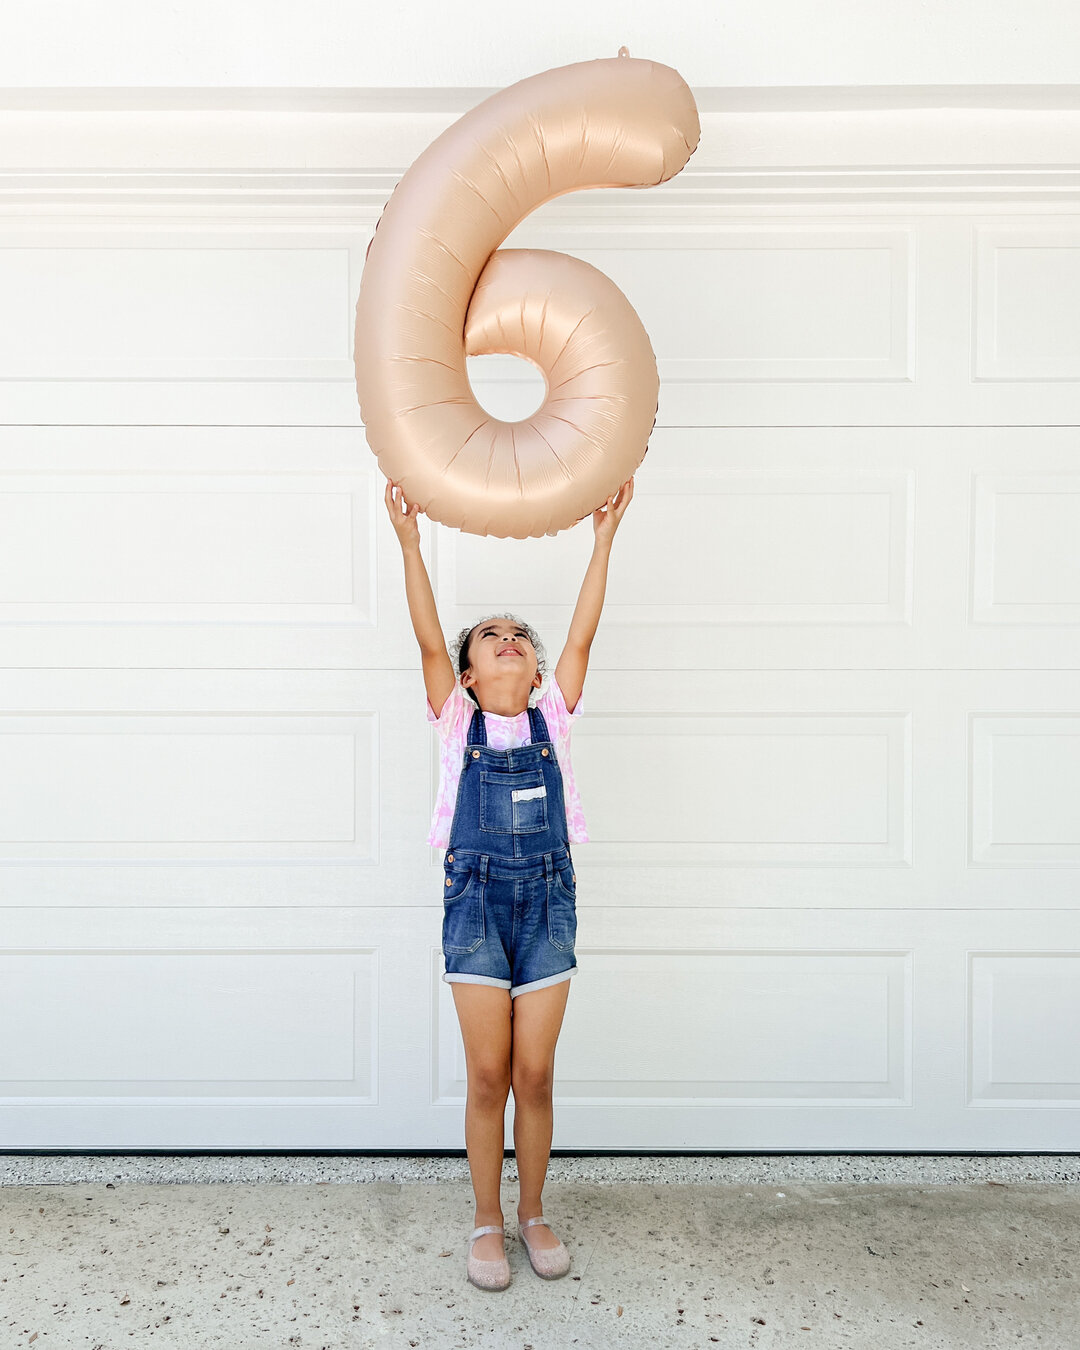 Celebrating my 6 year old today (#imnotcryingyourecrying)!! ⁣
In the last six years, I&rsquo;ve watch you becoming this bright, cheerful, smart, and creative girl! You&rsquo;re heart is gold and your endless love (and hugs) will make this world a bet